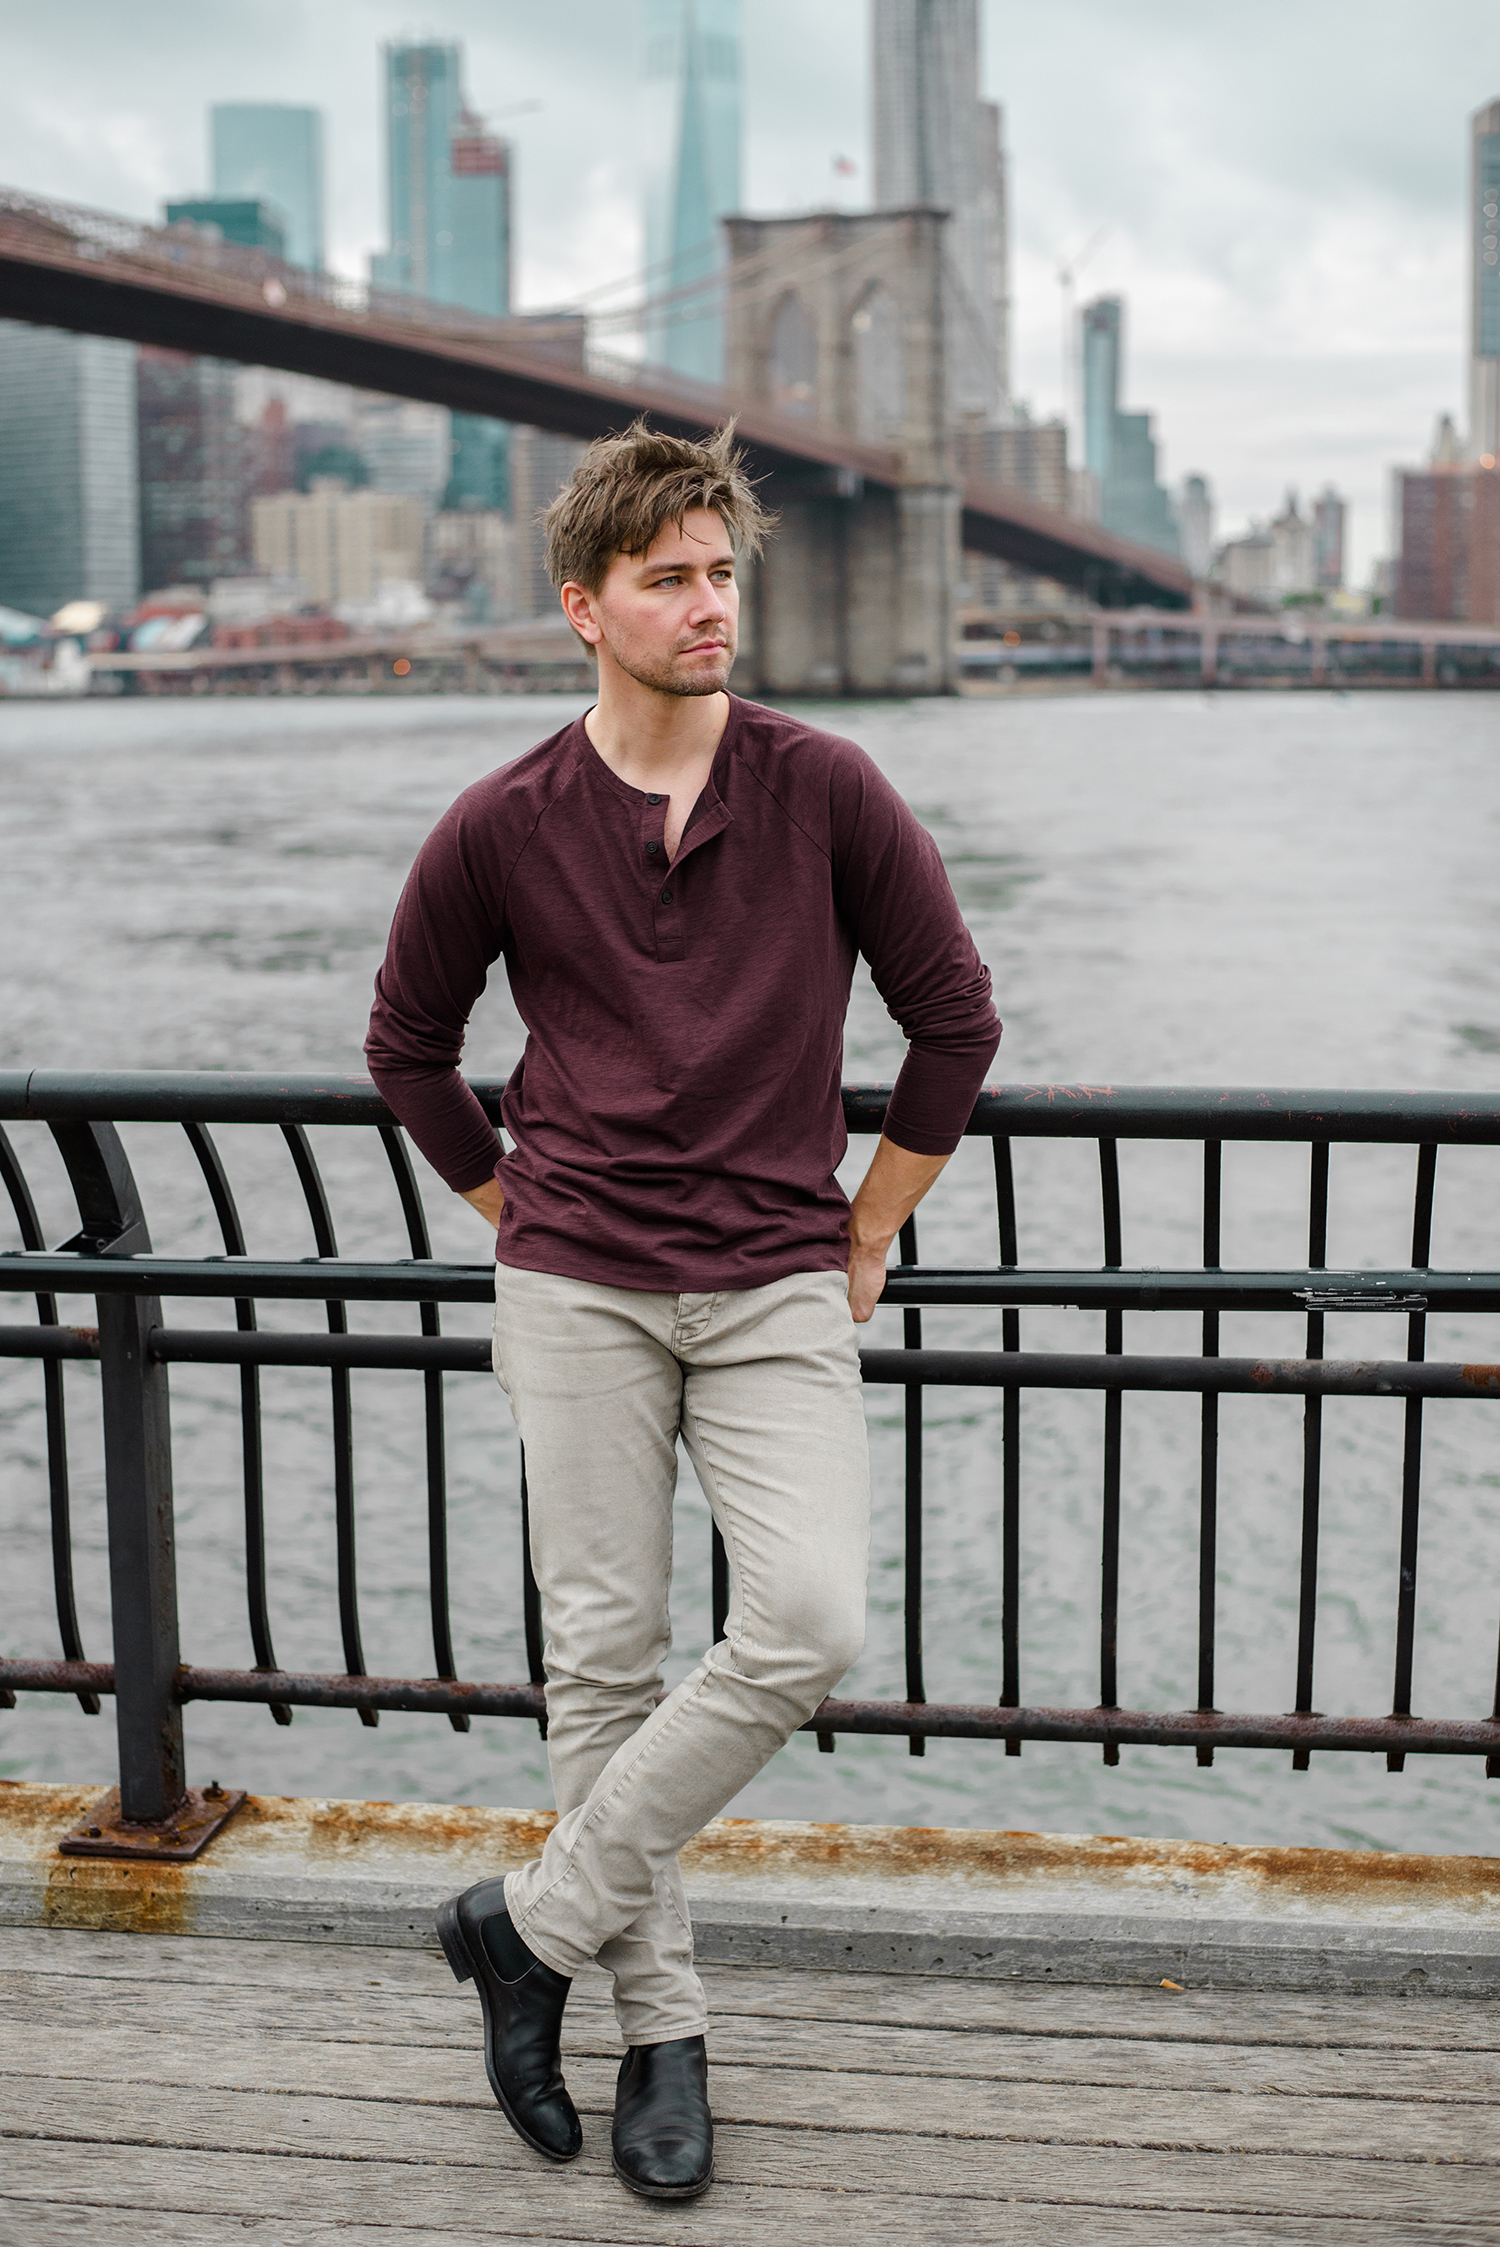 Torrance Coombs joins wife Alyssa Campanella of The A List blog for autumn in New York